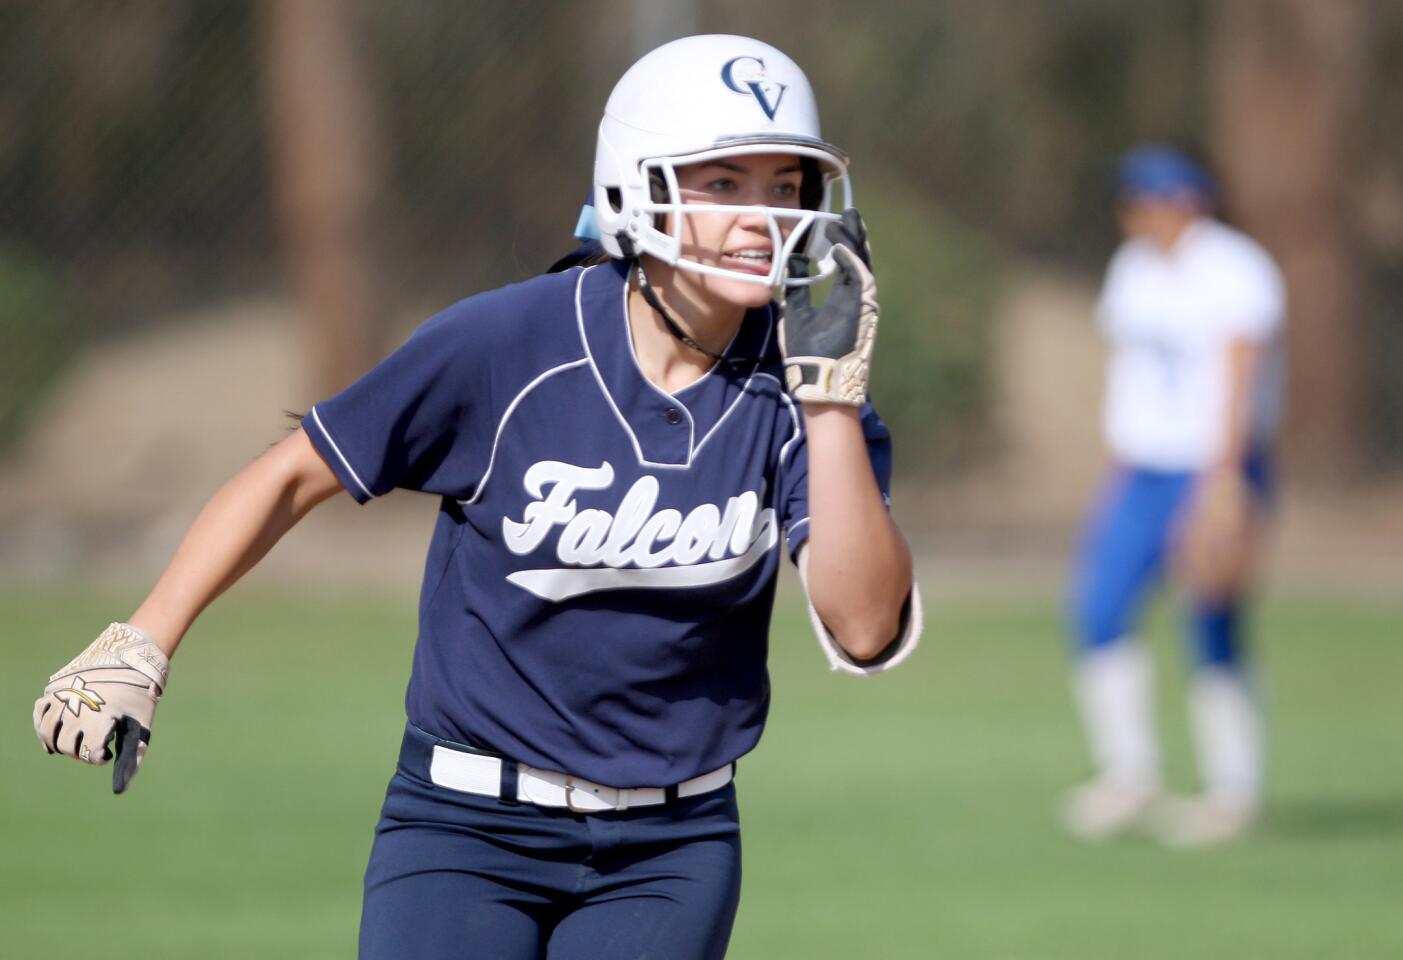 Crescenta Valley High School softball player #8 Sydney Wells rounds second base after hitting a round-tripper in away game vs. Burbank High School at the Bulldogs field in Burbank on Thursday, April 14, 2016. CVHS won 14-3 in 5 innings.